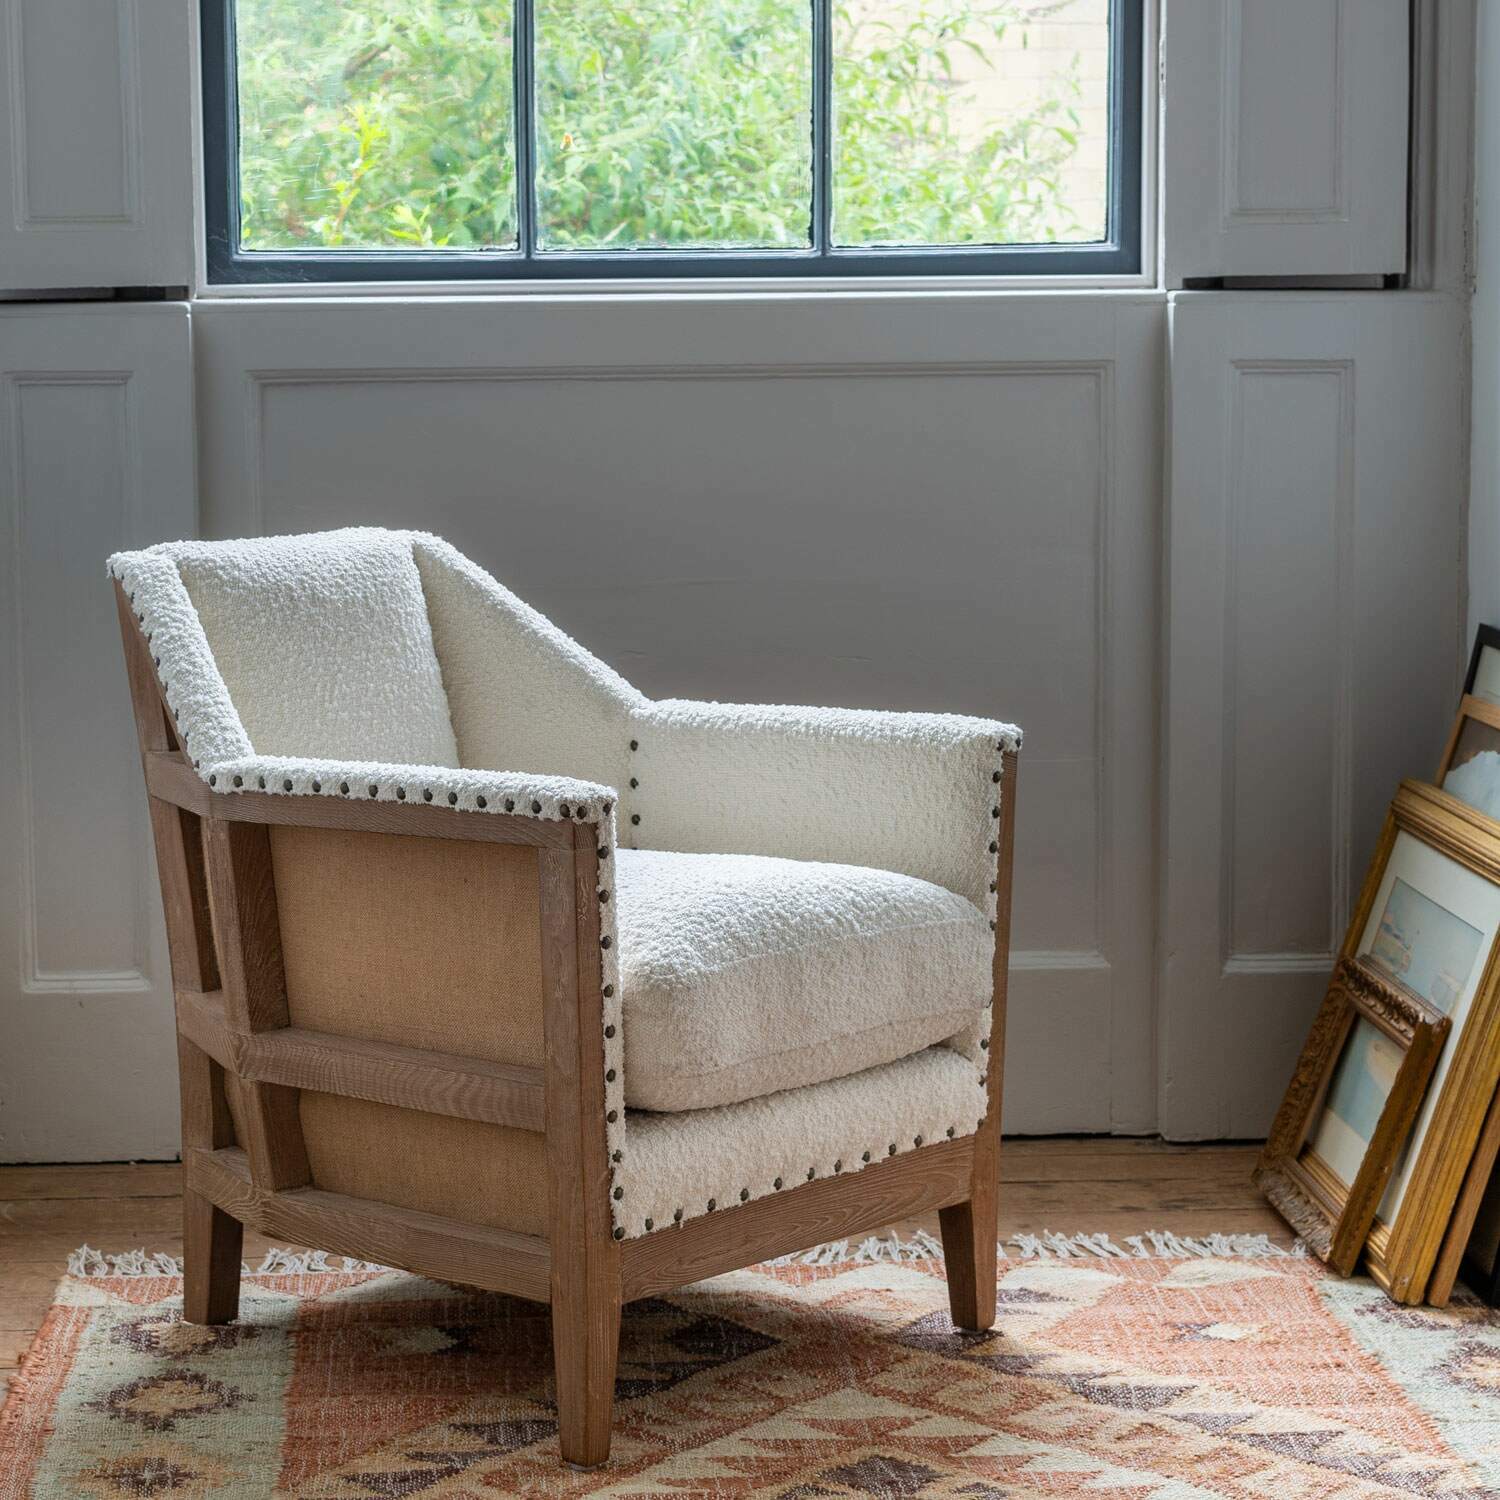 Read more about Graham and green hoxton chalk bouclé armchair